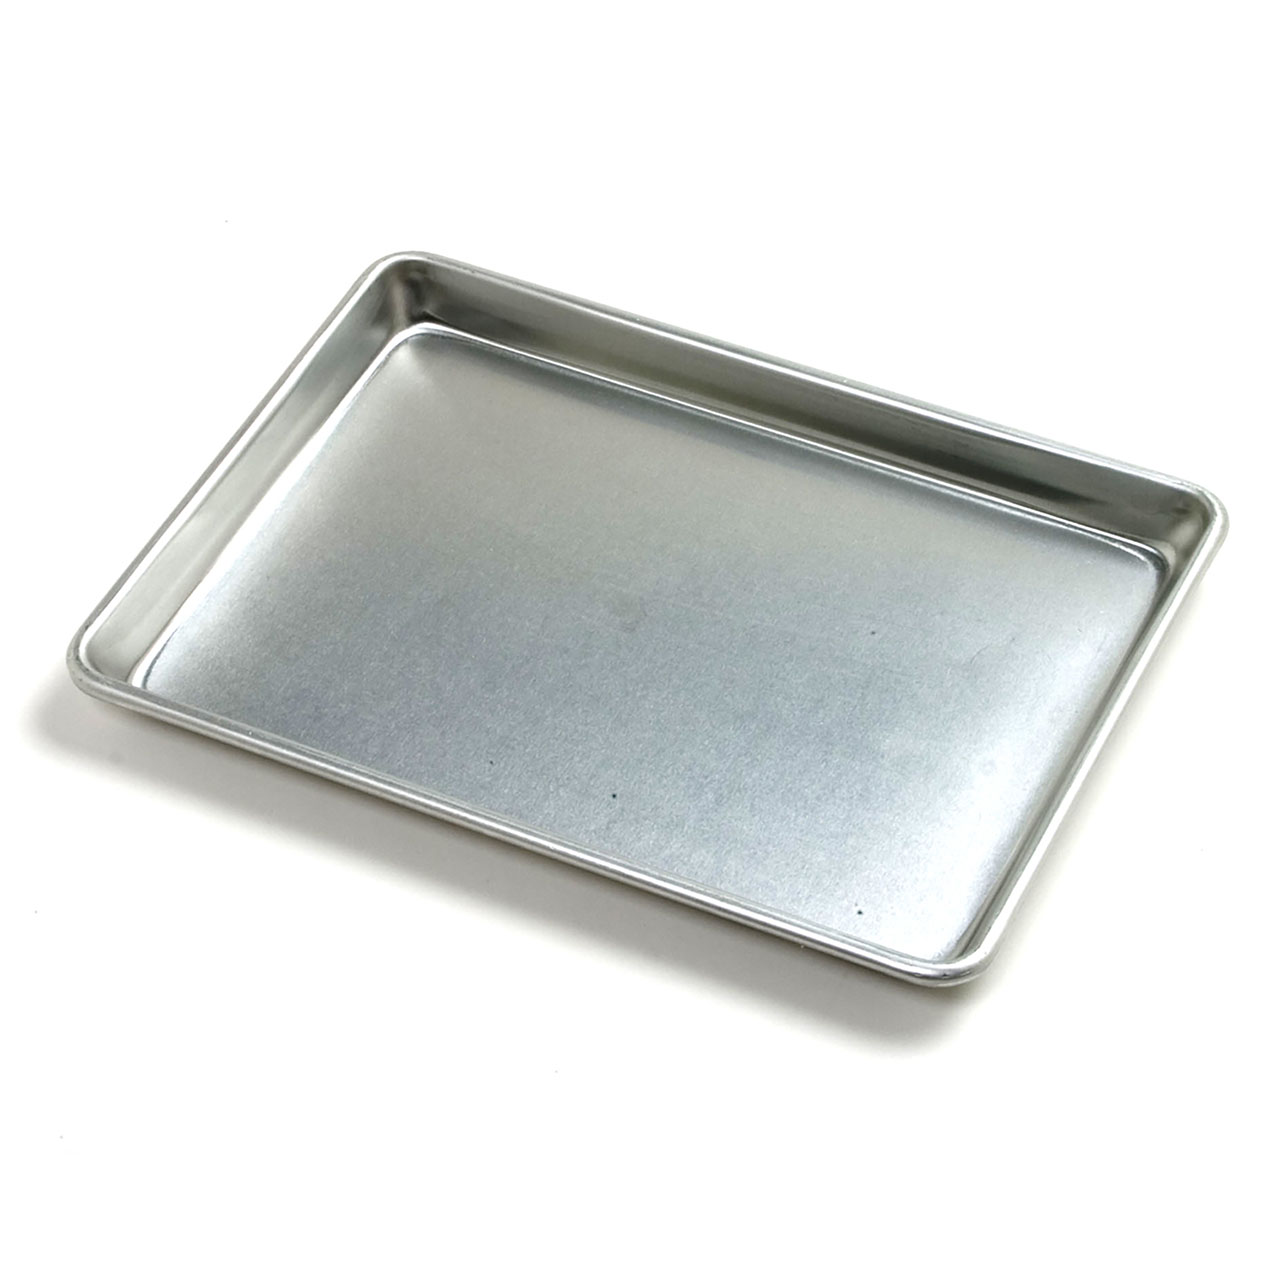 Jelly Roll Baking Pan 9 – Ventures Intl Airbake Jelly Roll Pan With Lid